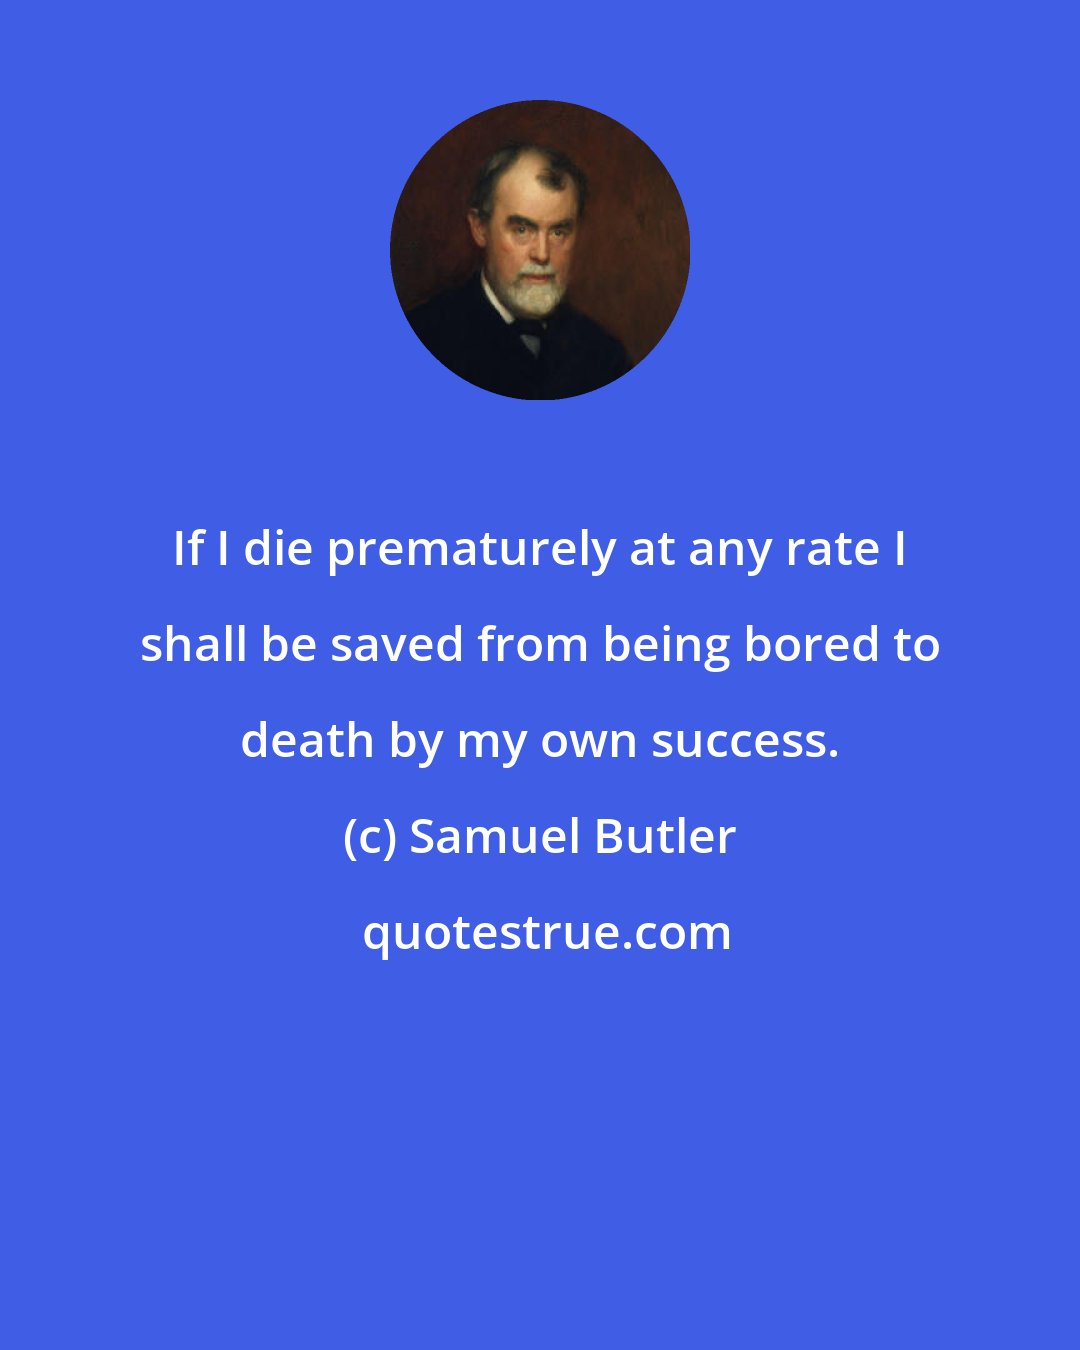 Samuel Butler: If I die prematurely at any rate I shall be saved from being bored to death by my own success.